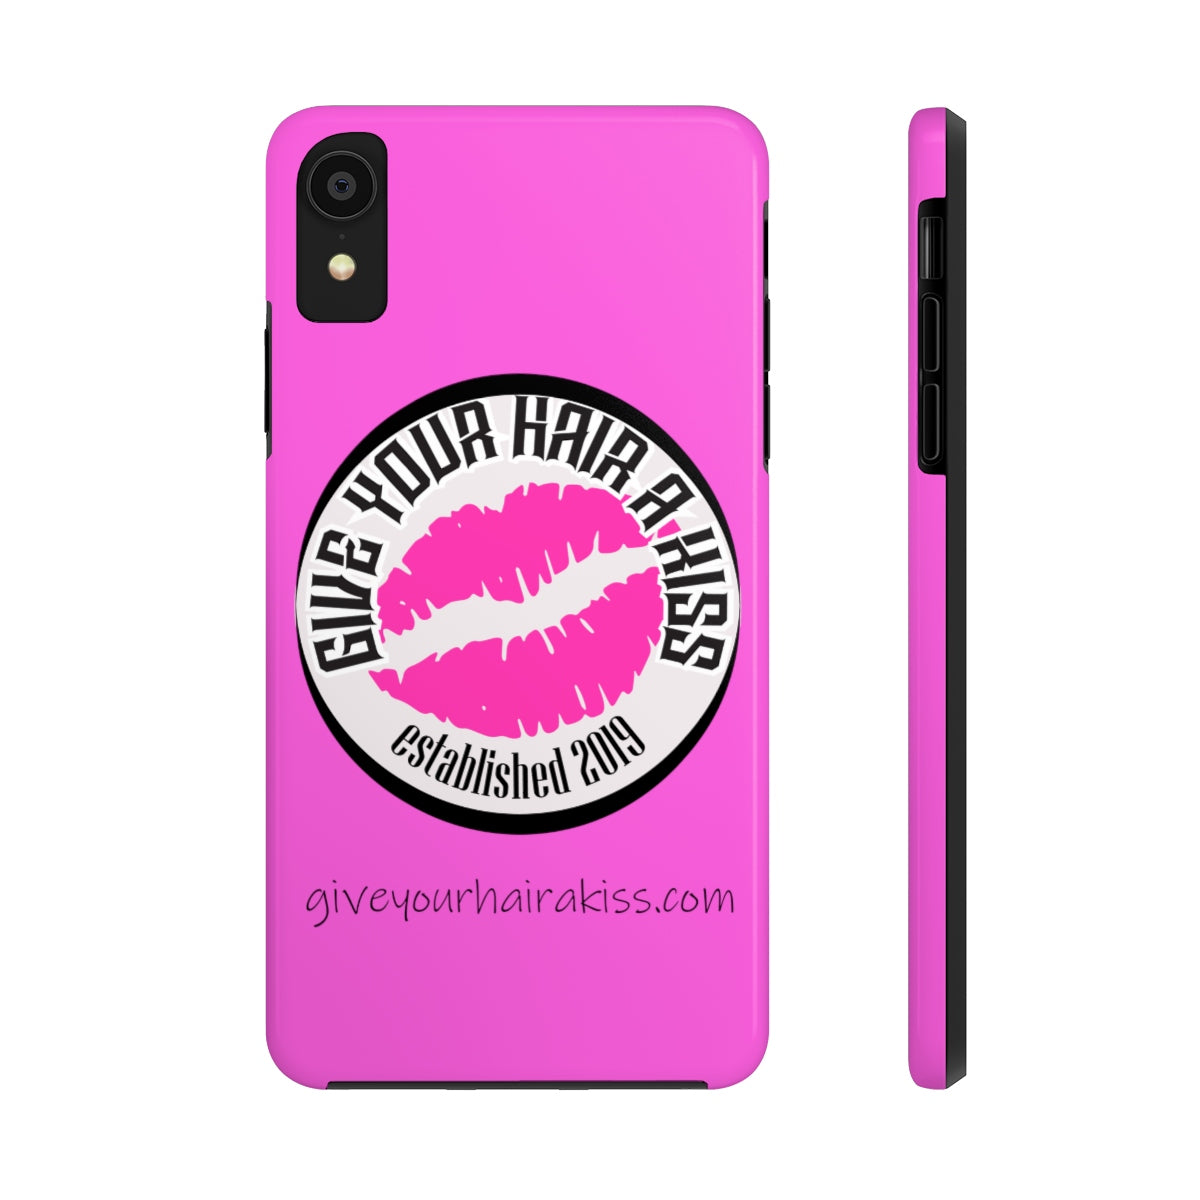 Case Mate Tough Phone Cases - Give Your Hair a Kiss